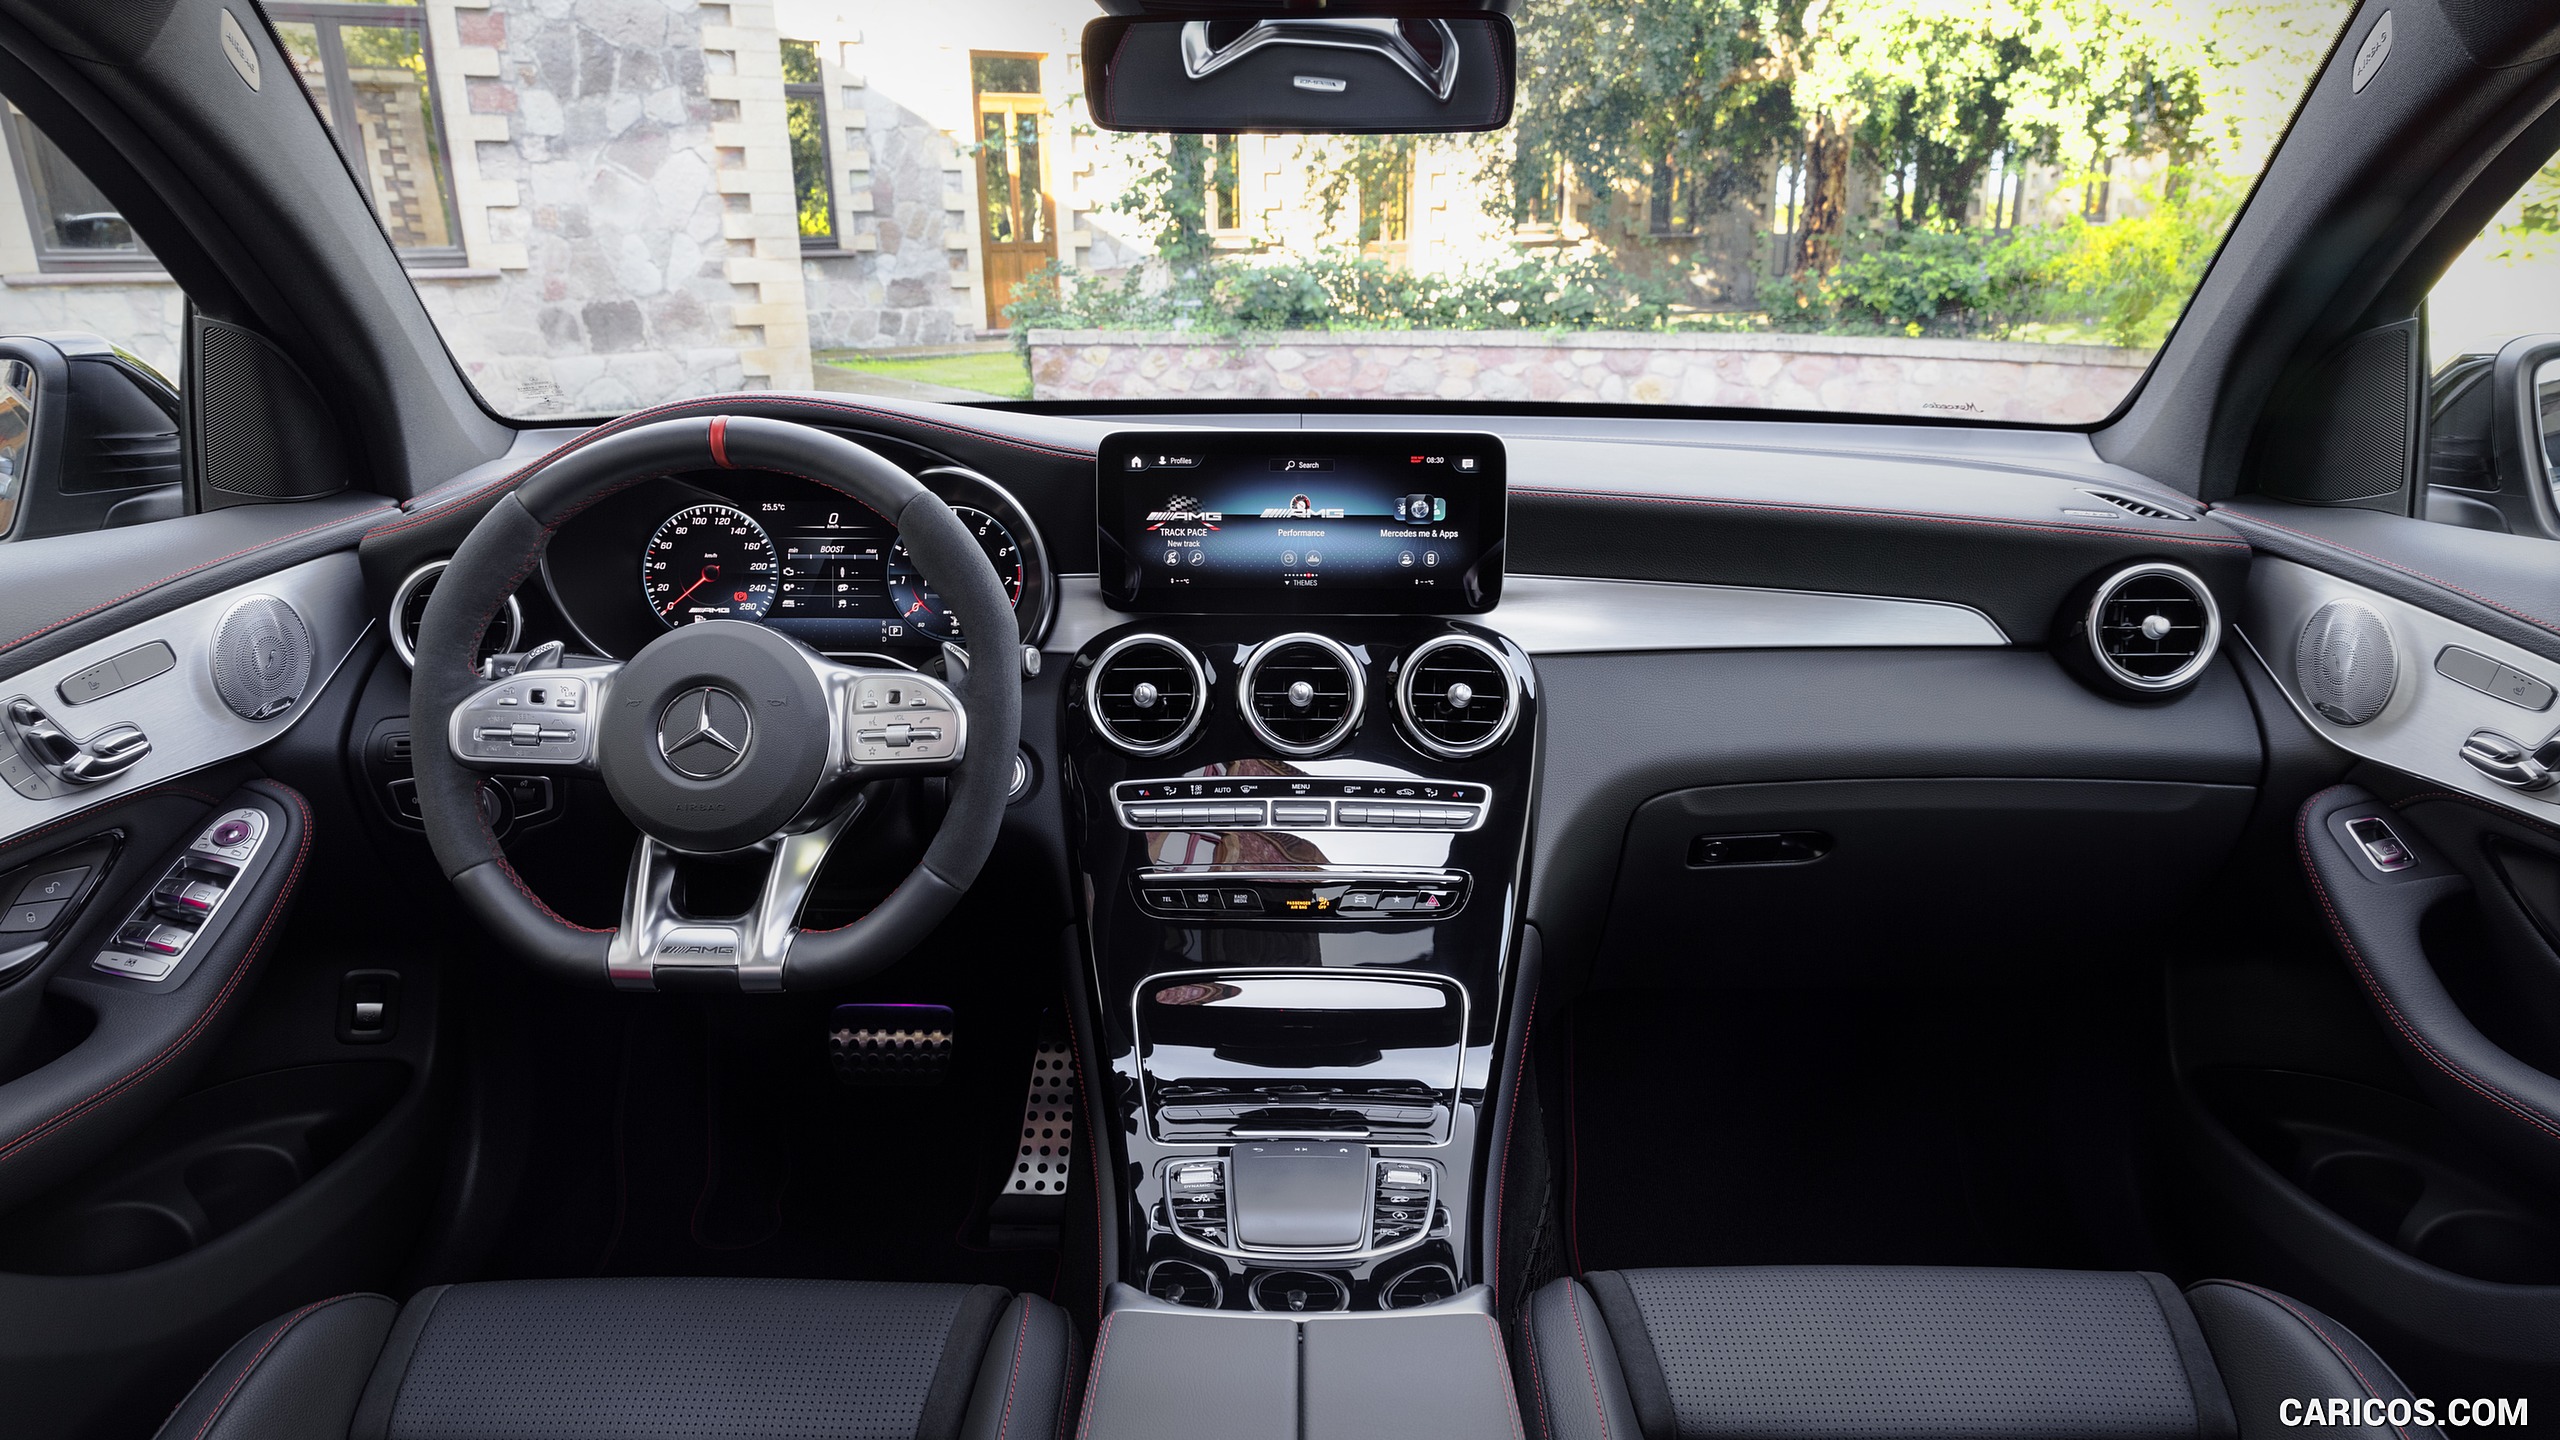 2020 Mercedes-AMG GLC 43 4MATIC Coupe - Interior, Cockpit, #28 of 173